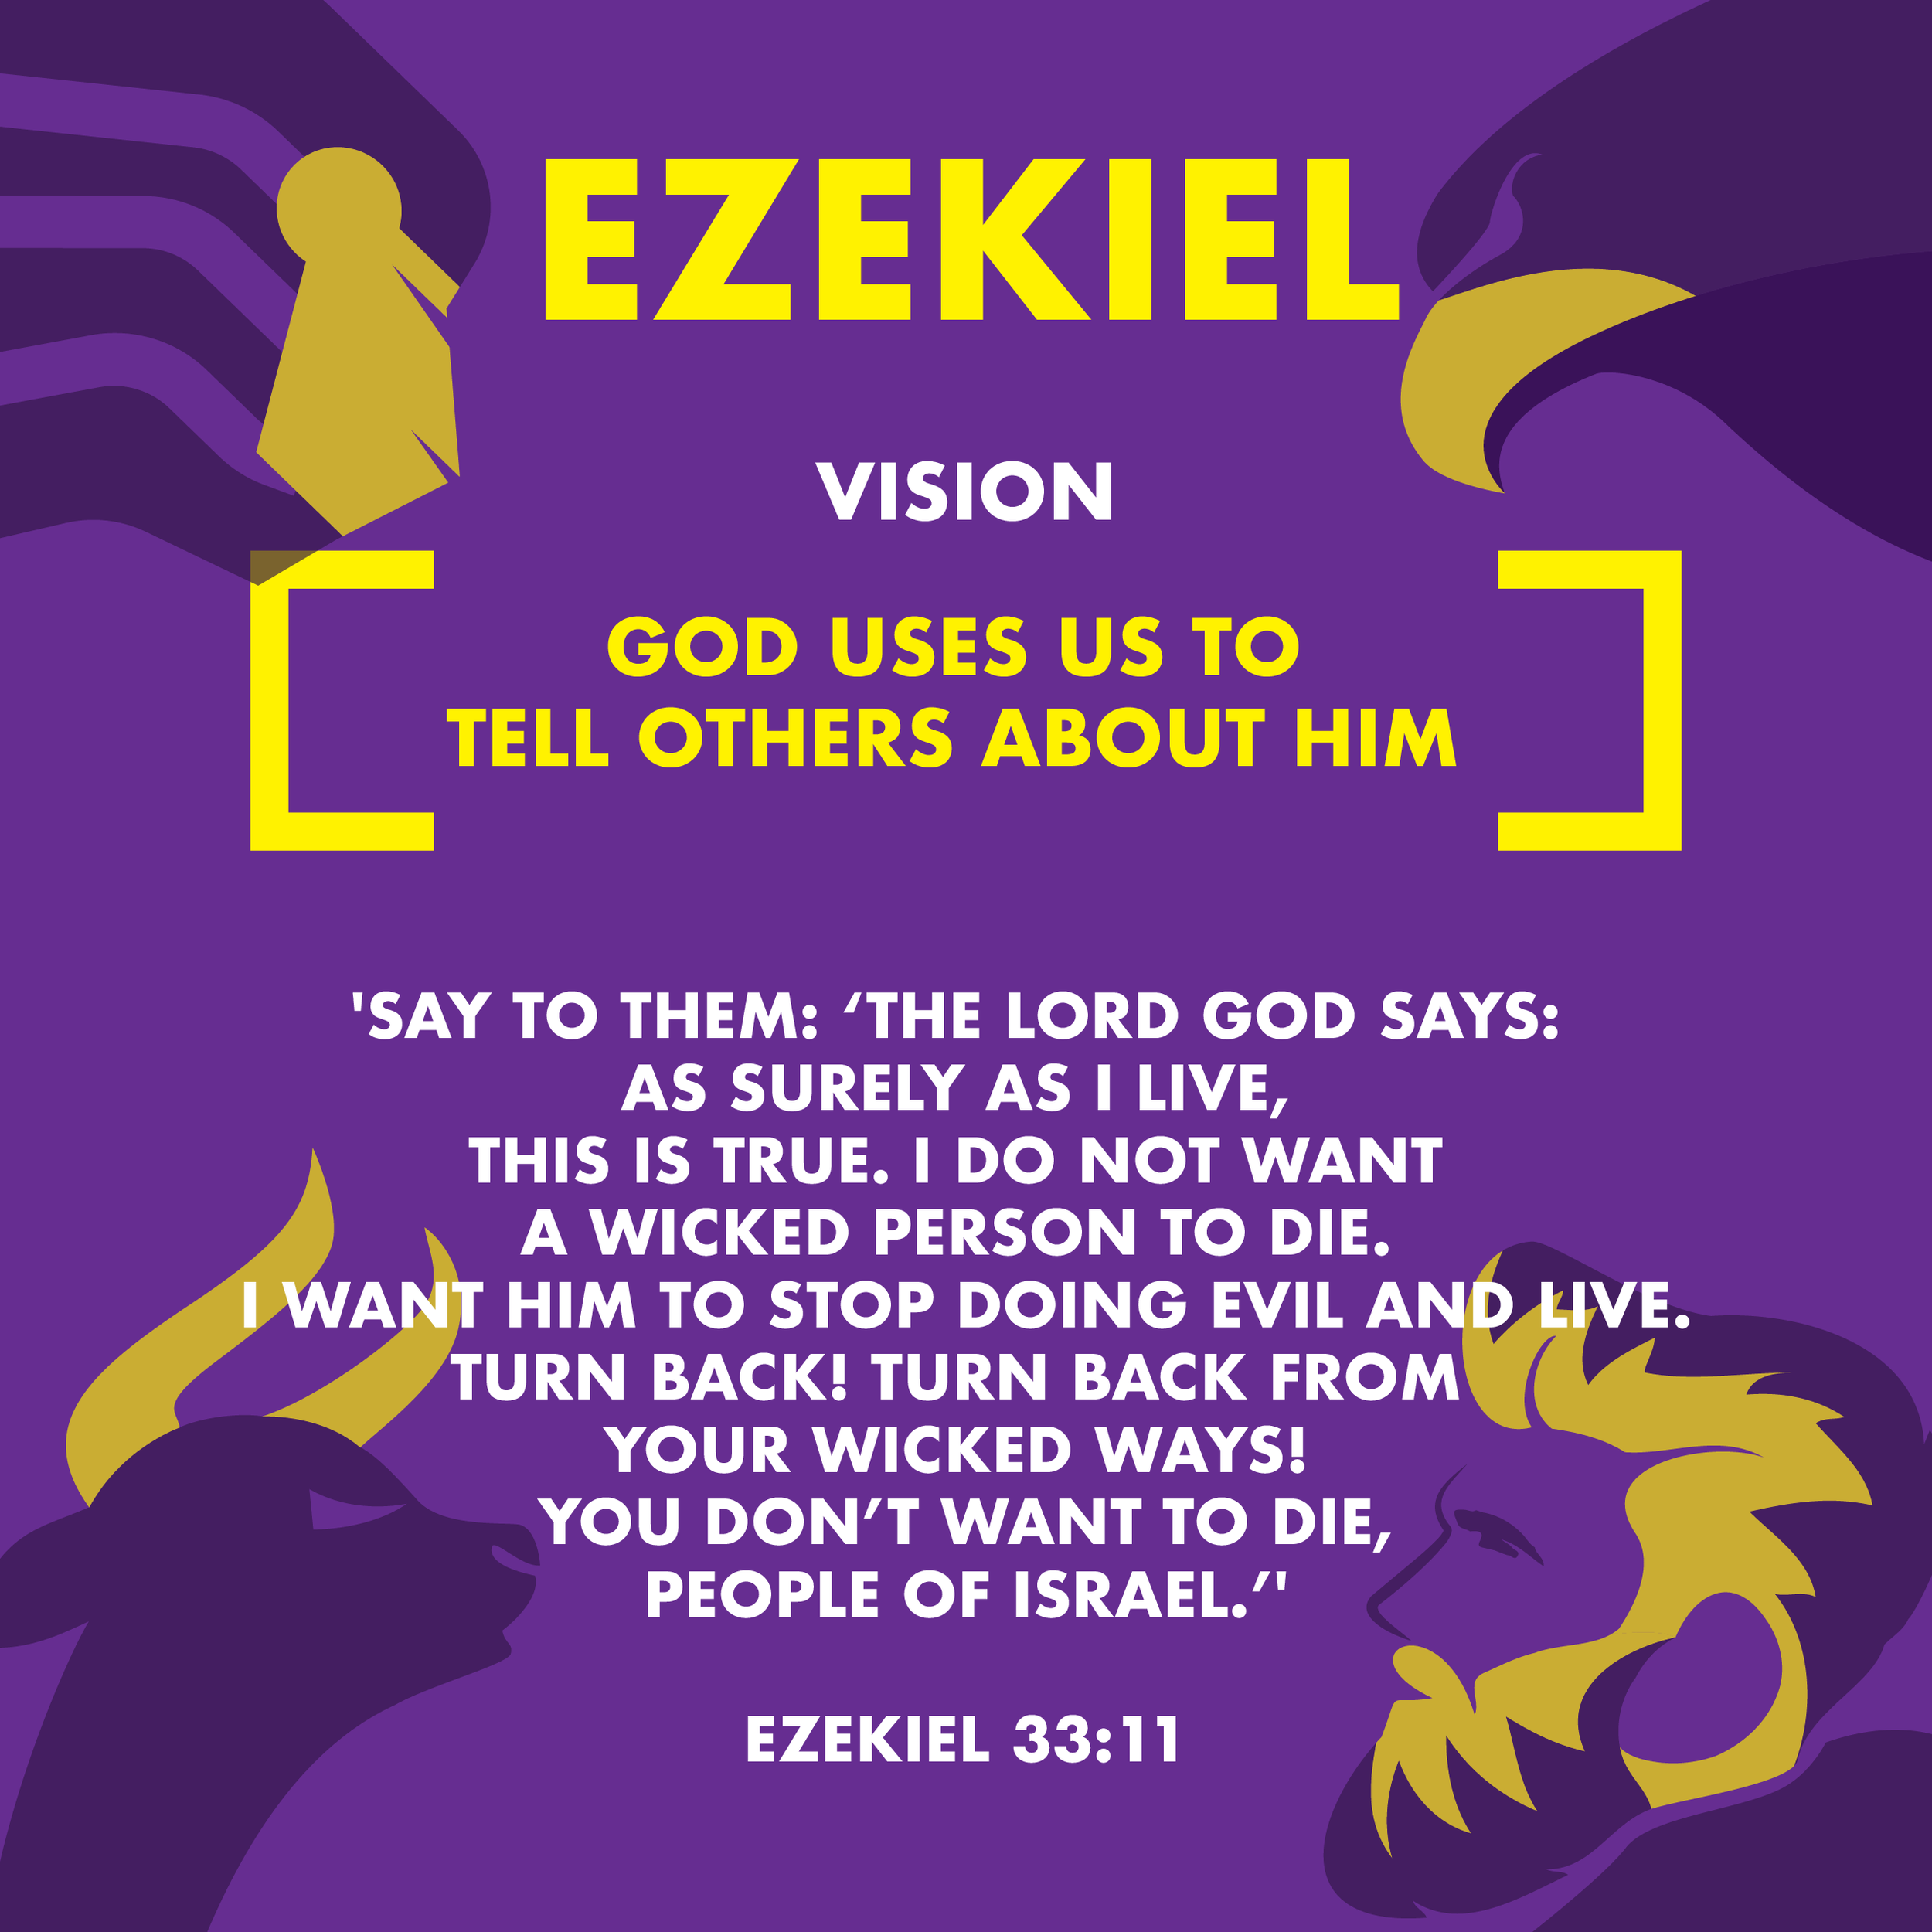 Books of the Bible_posters_24 Ezequiel.png